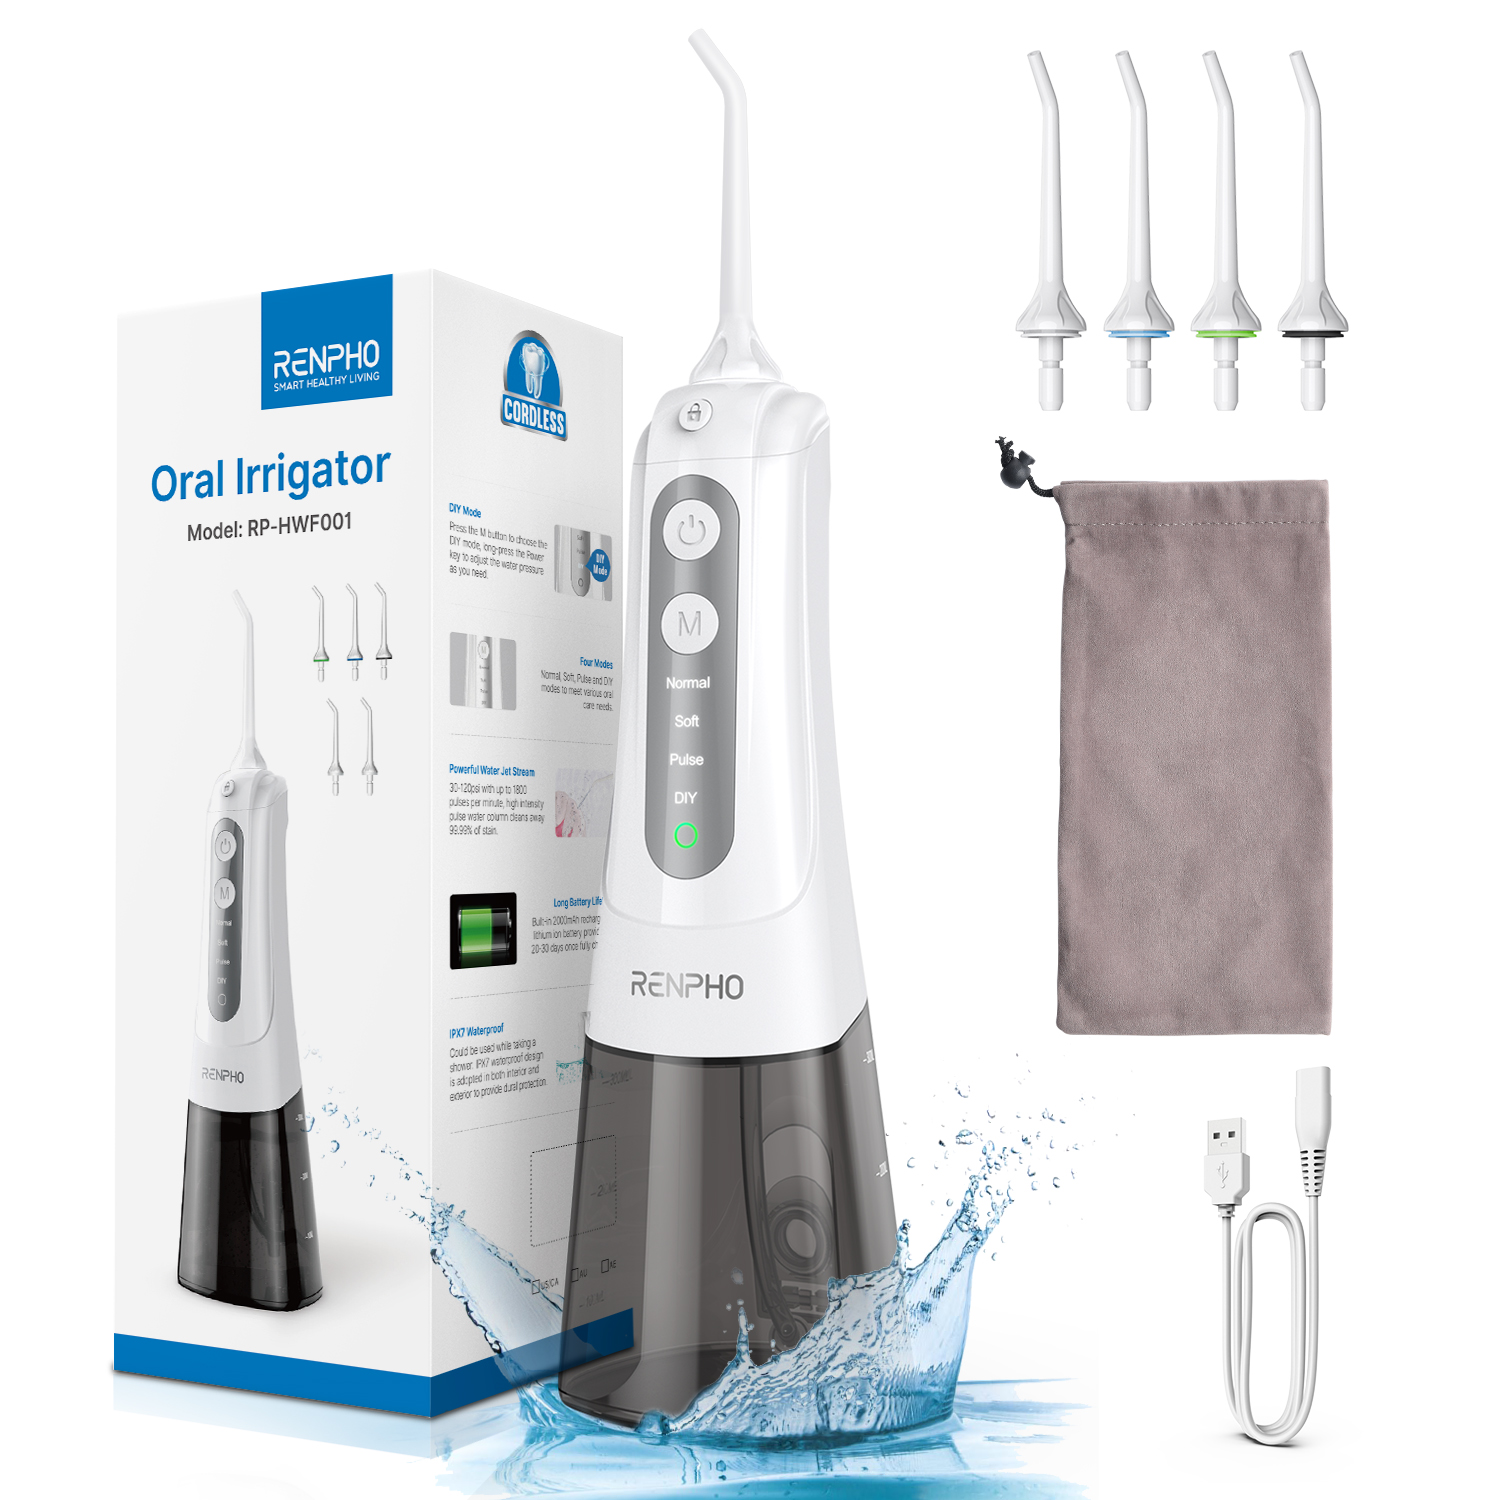 RENPHO Portable Rechargeable Water Flosser Oral Irrigator, White - image 1 of 8